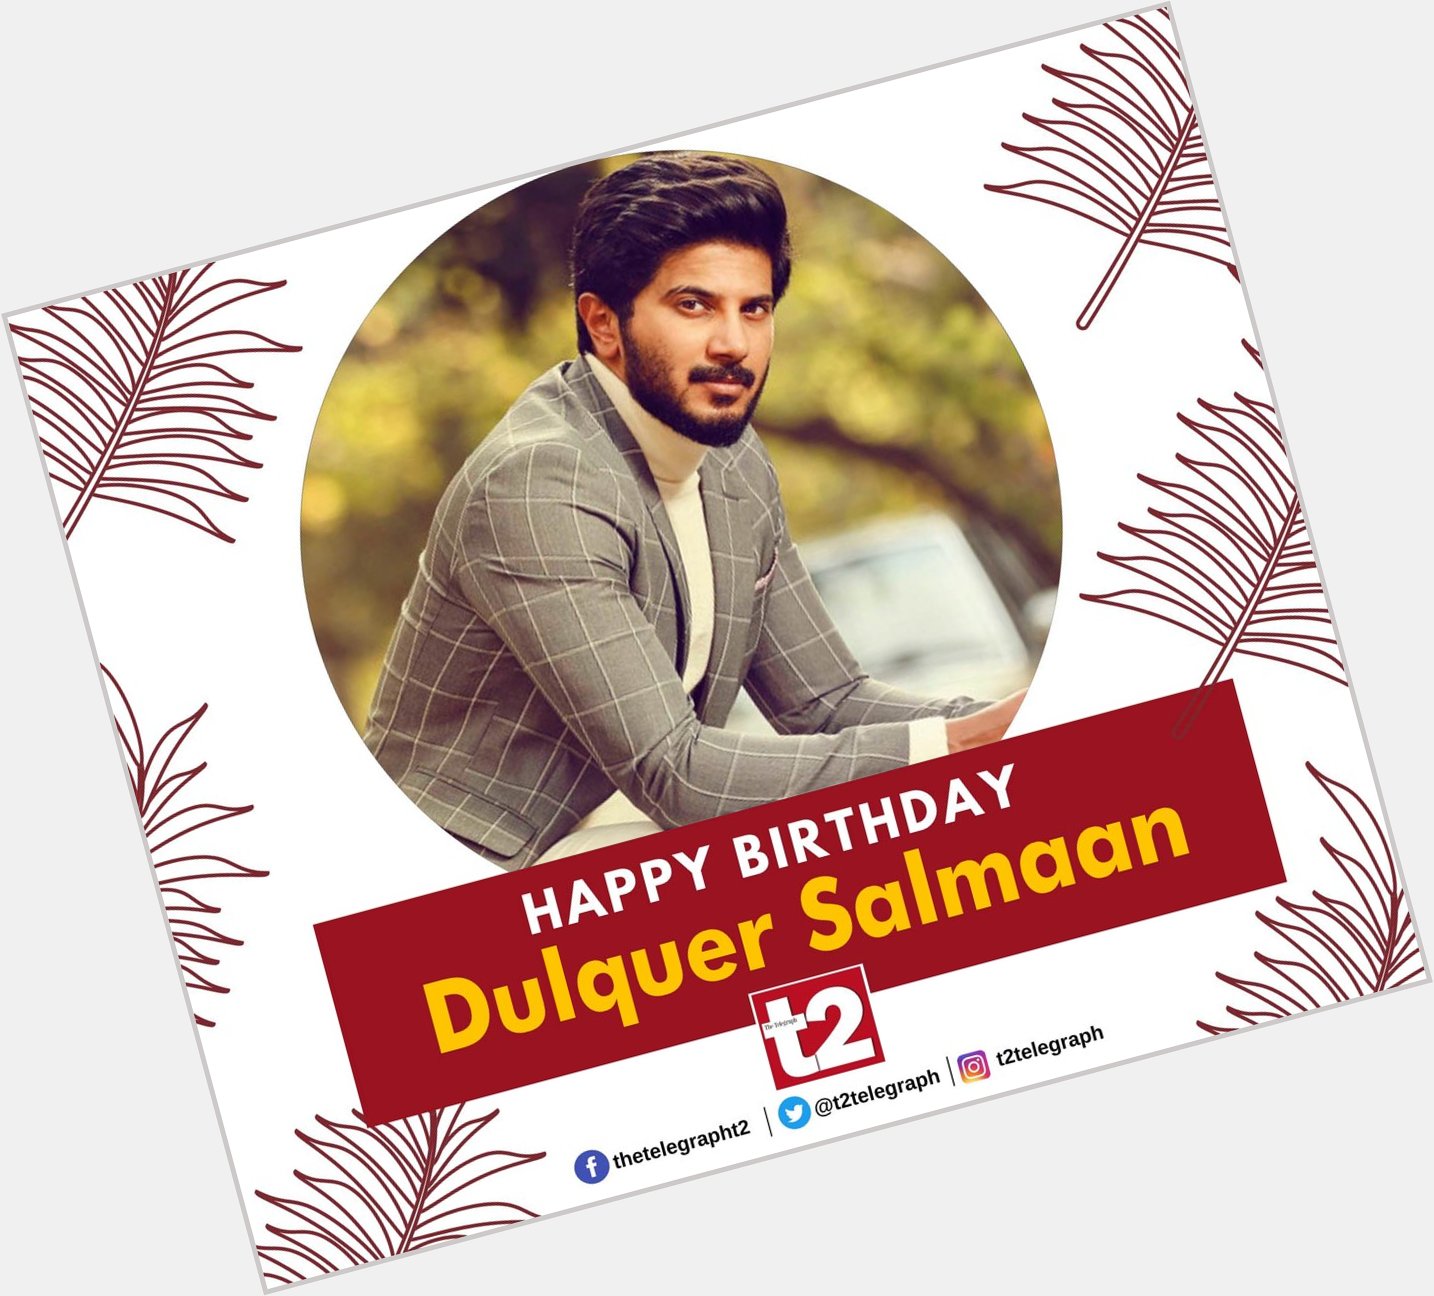 He\s the man who sets our pulses racing. Happy birthday, Dulquer Salmaan! More of you in Bollywood, please! 